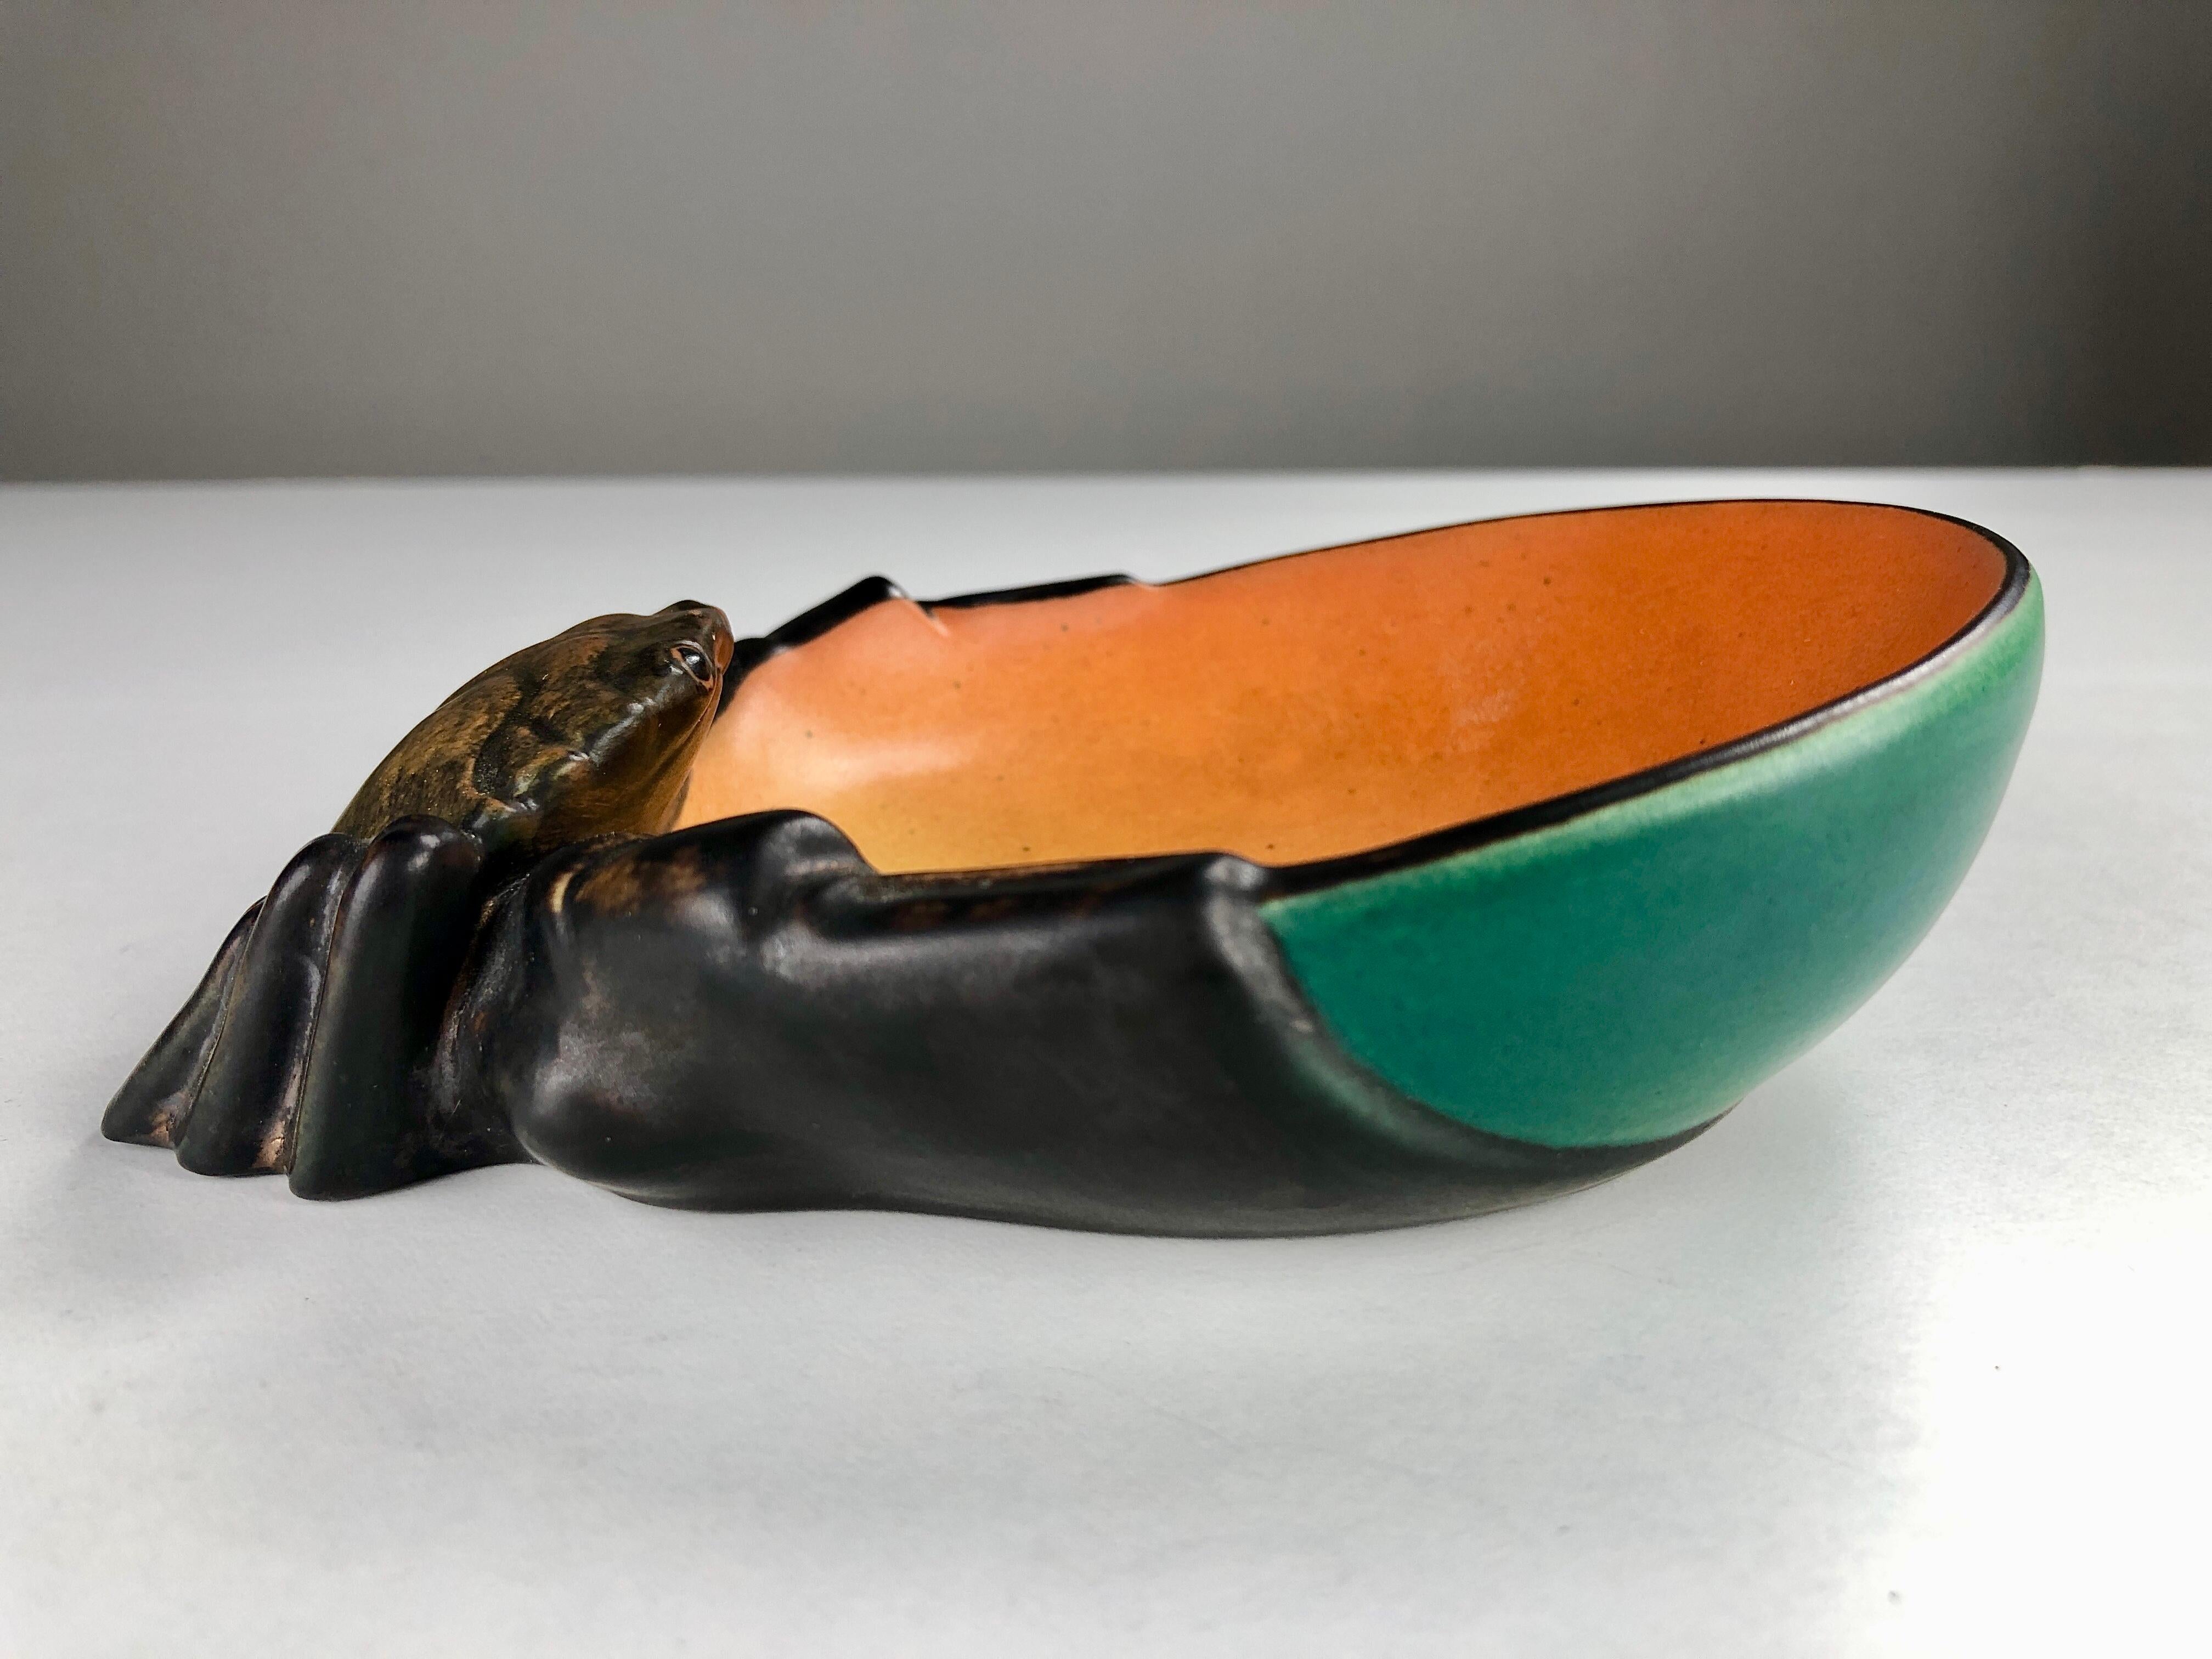 Danish Art Nouveau ash tray / bowl by Georg Jensen for Ipsens Enke in 1903.

The art nuveau ash tray / bowl feature a well made lively crab is in excellent condition.

Georg Jensen (1866-1935) was a leading Danish silversmith and designer who